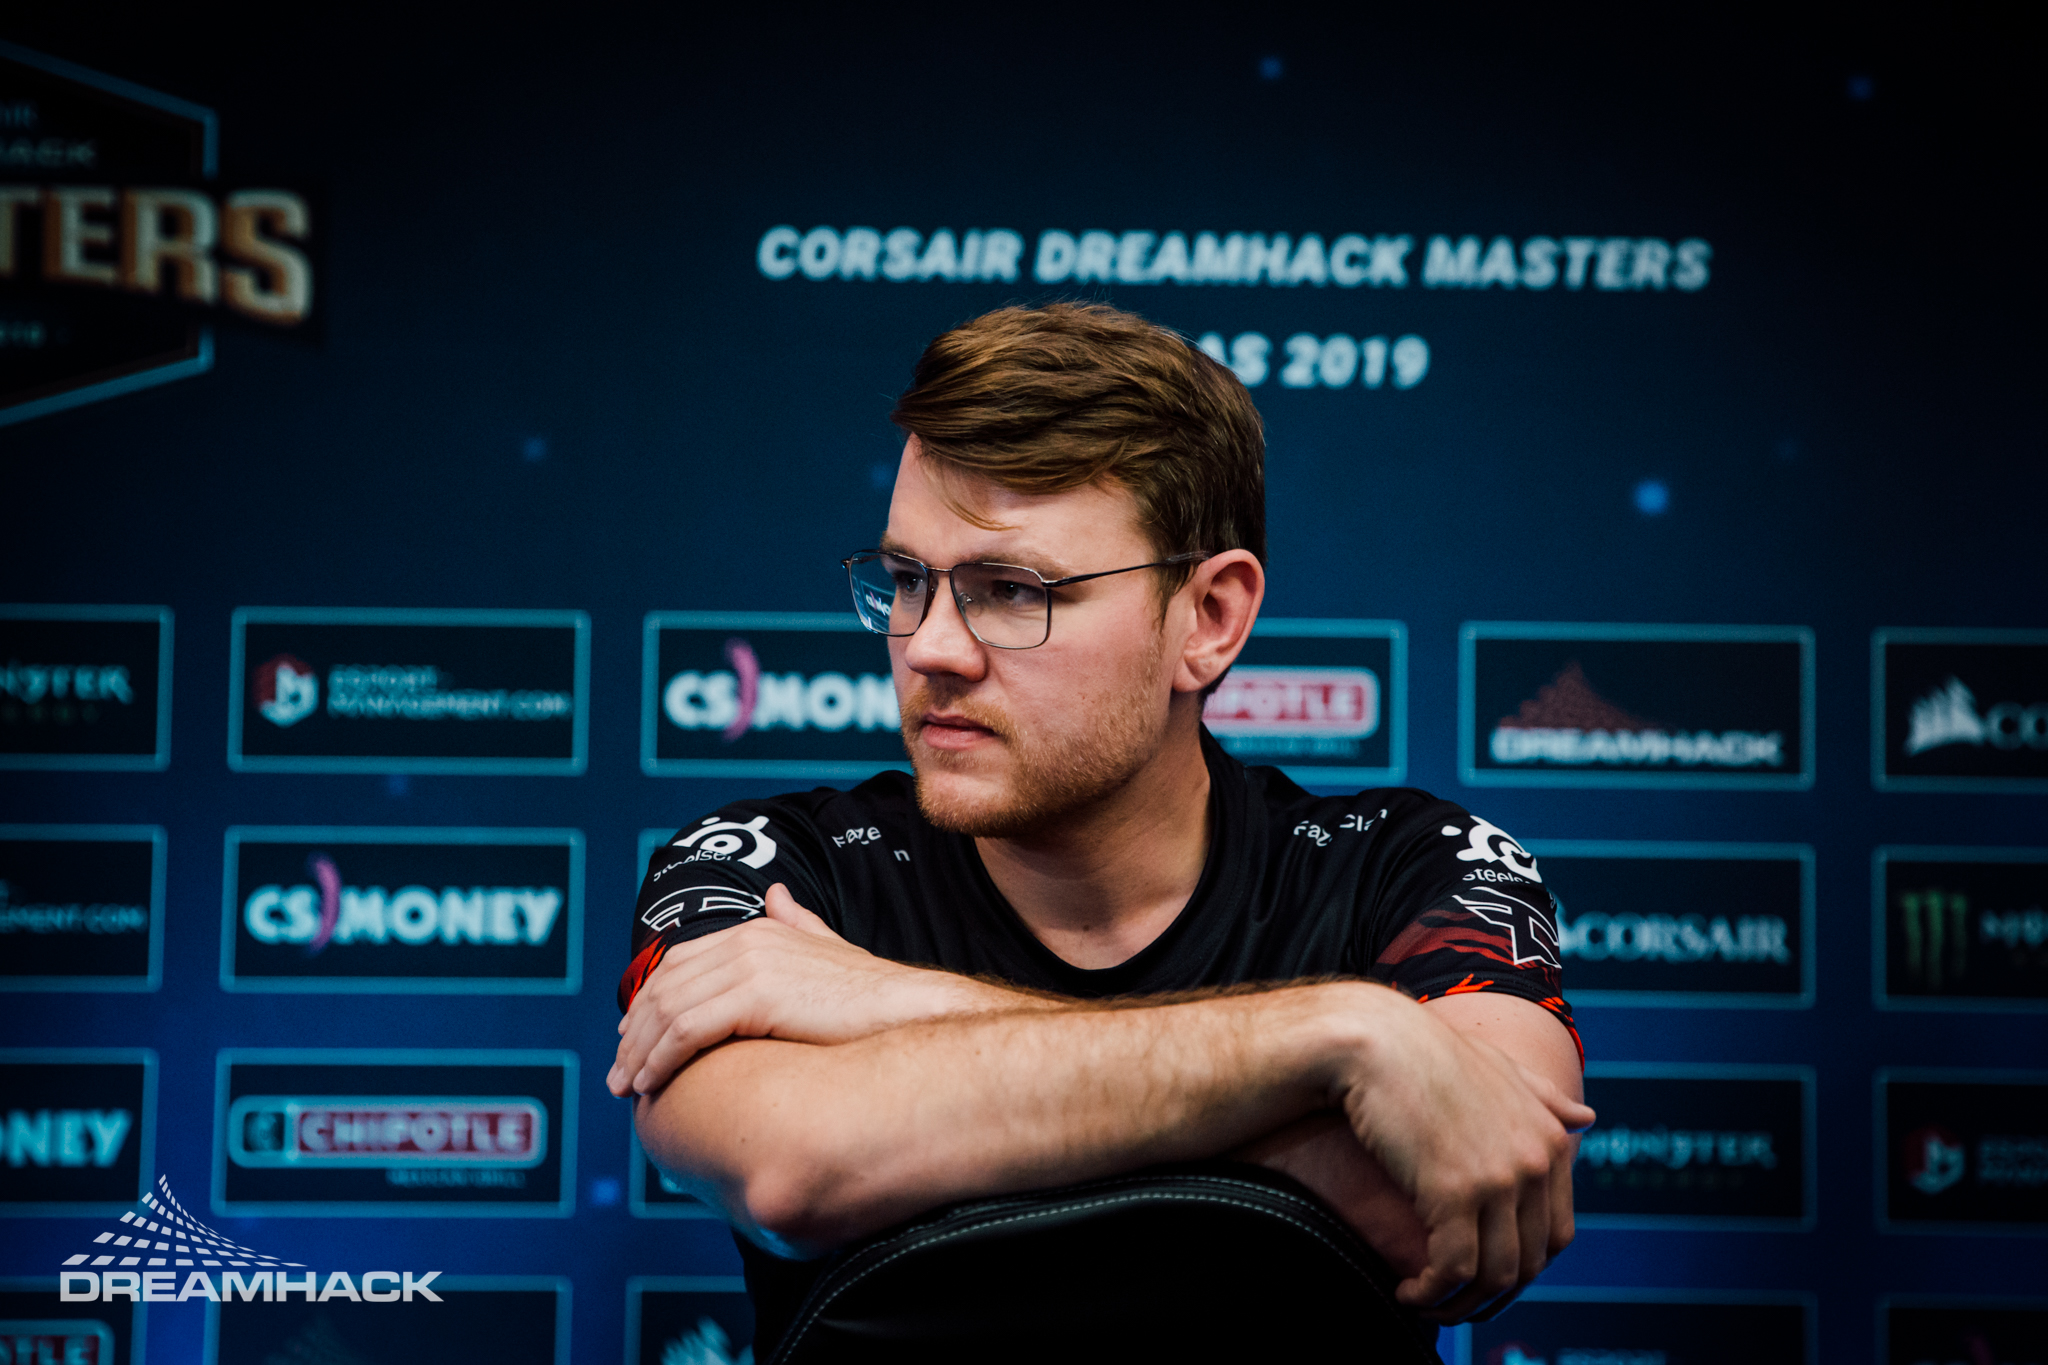 NEO, the oldest player at StarLadder Berlin Major, is twice as old as oBo, the youngest - Dot Esports